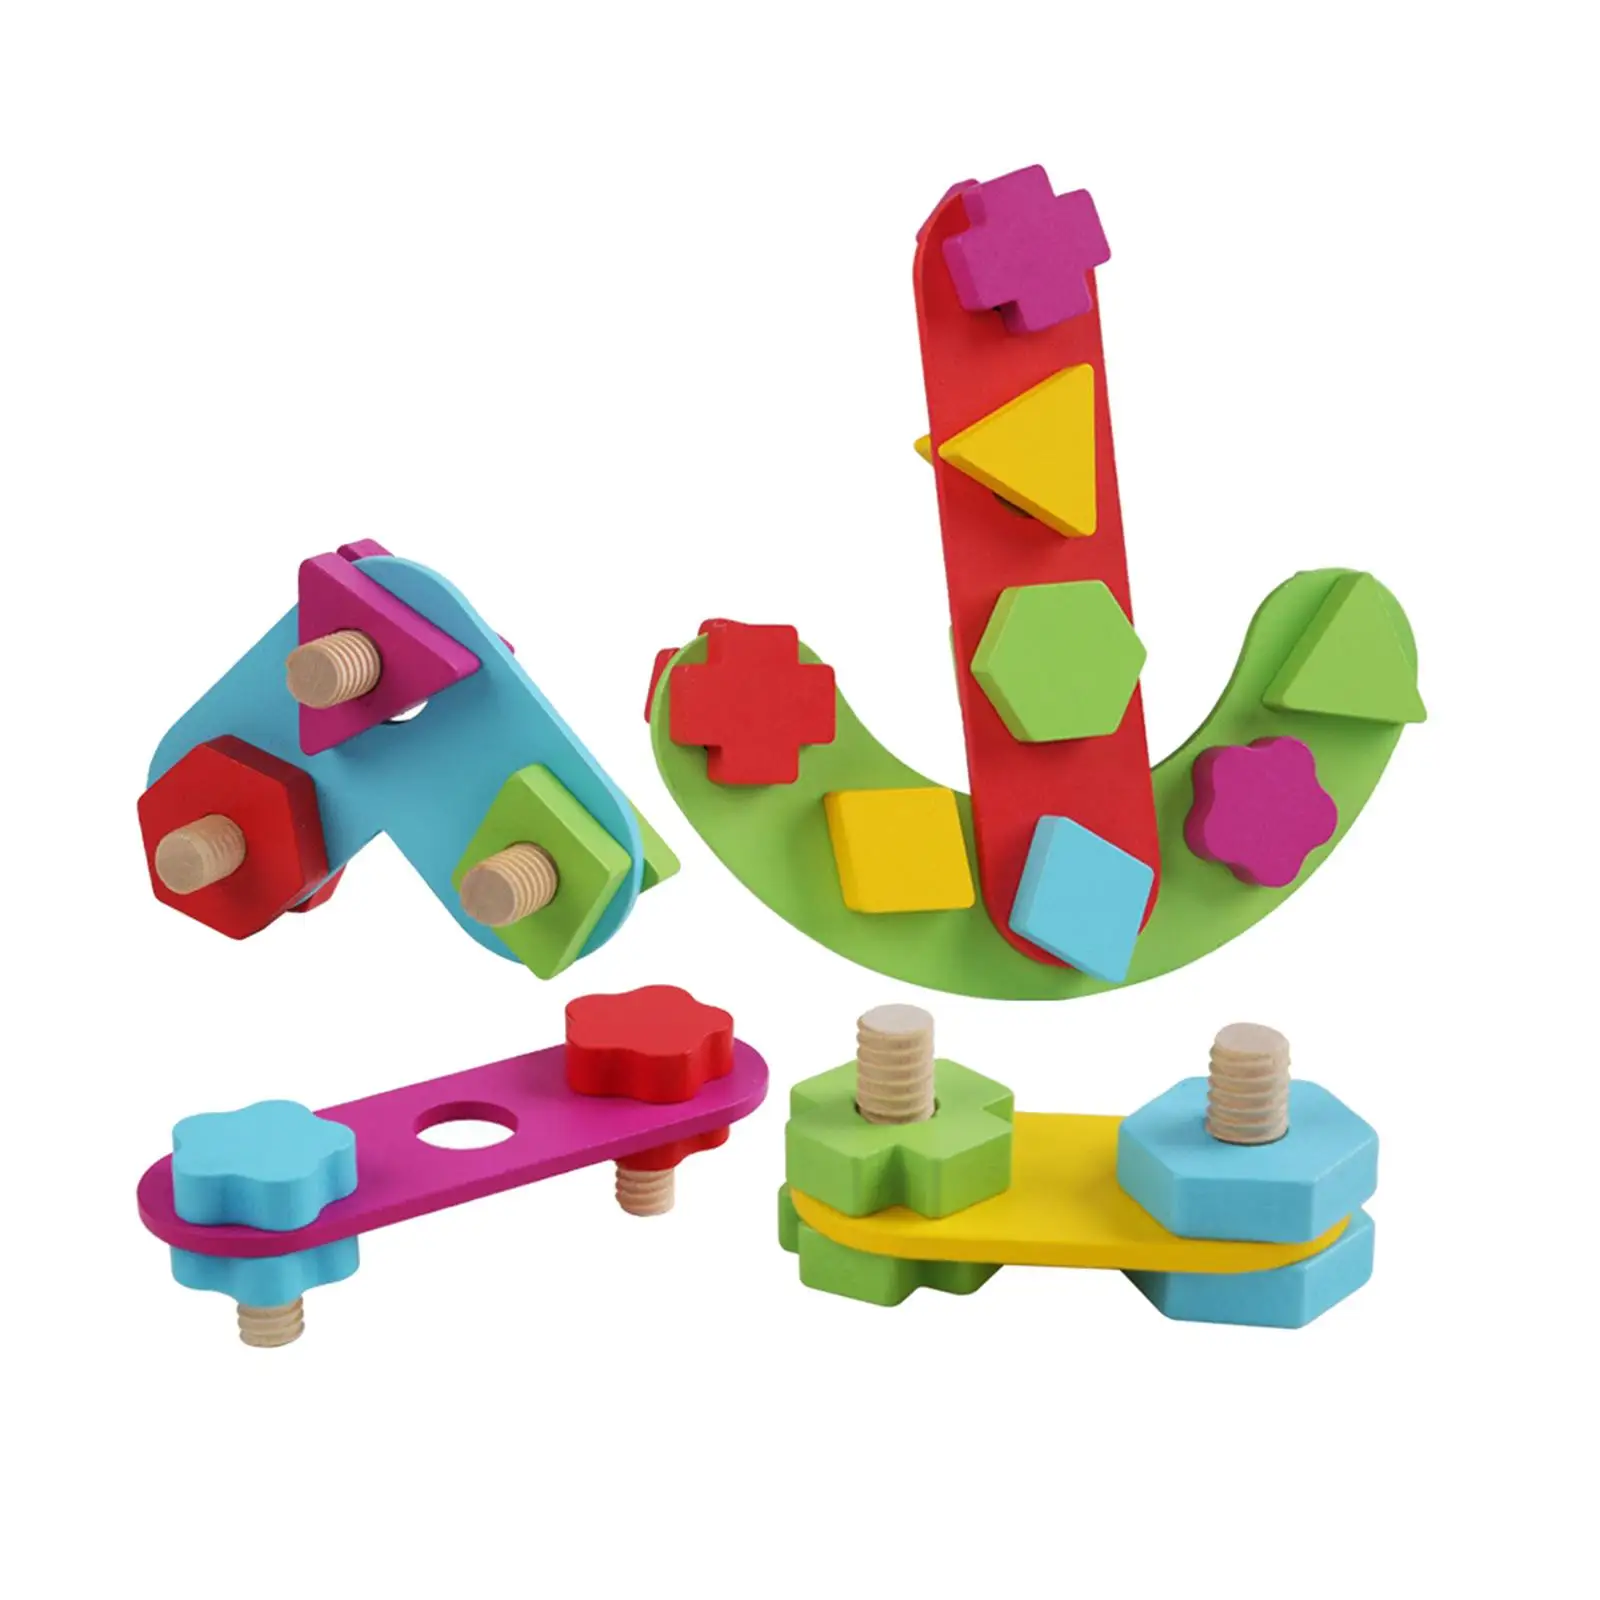 Kids Nuts and Bolts Play and Learn for Party Toy Ages 3 Year Old up